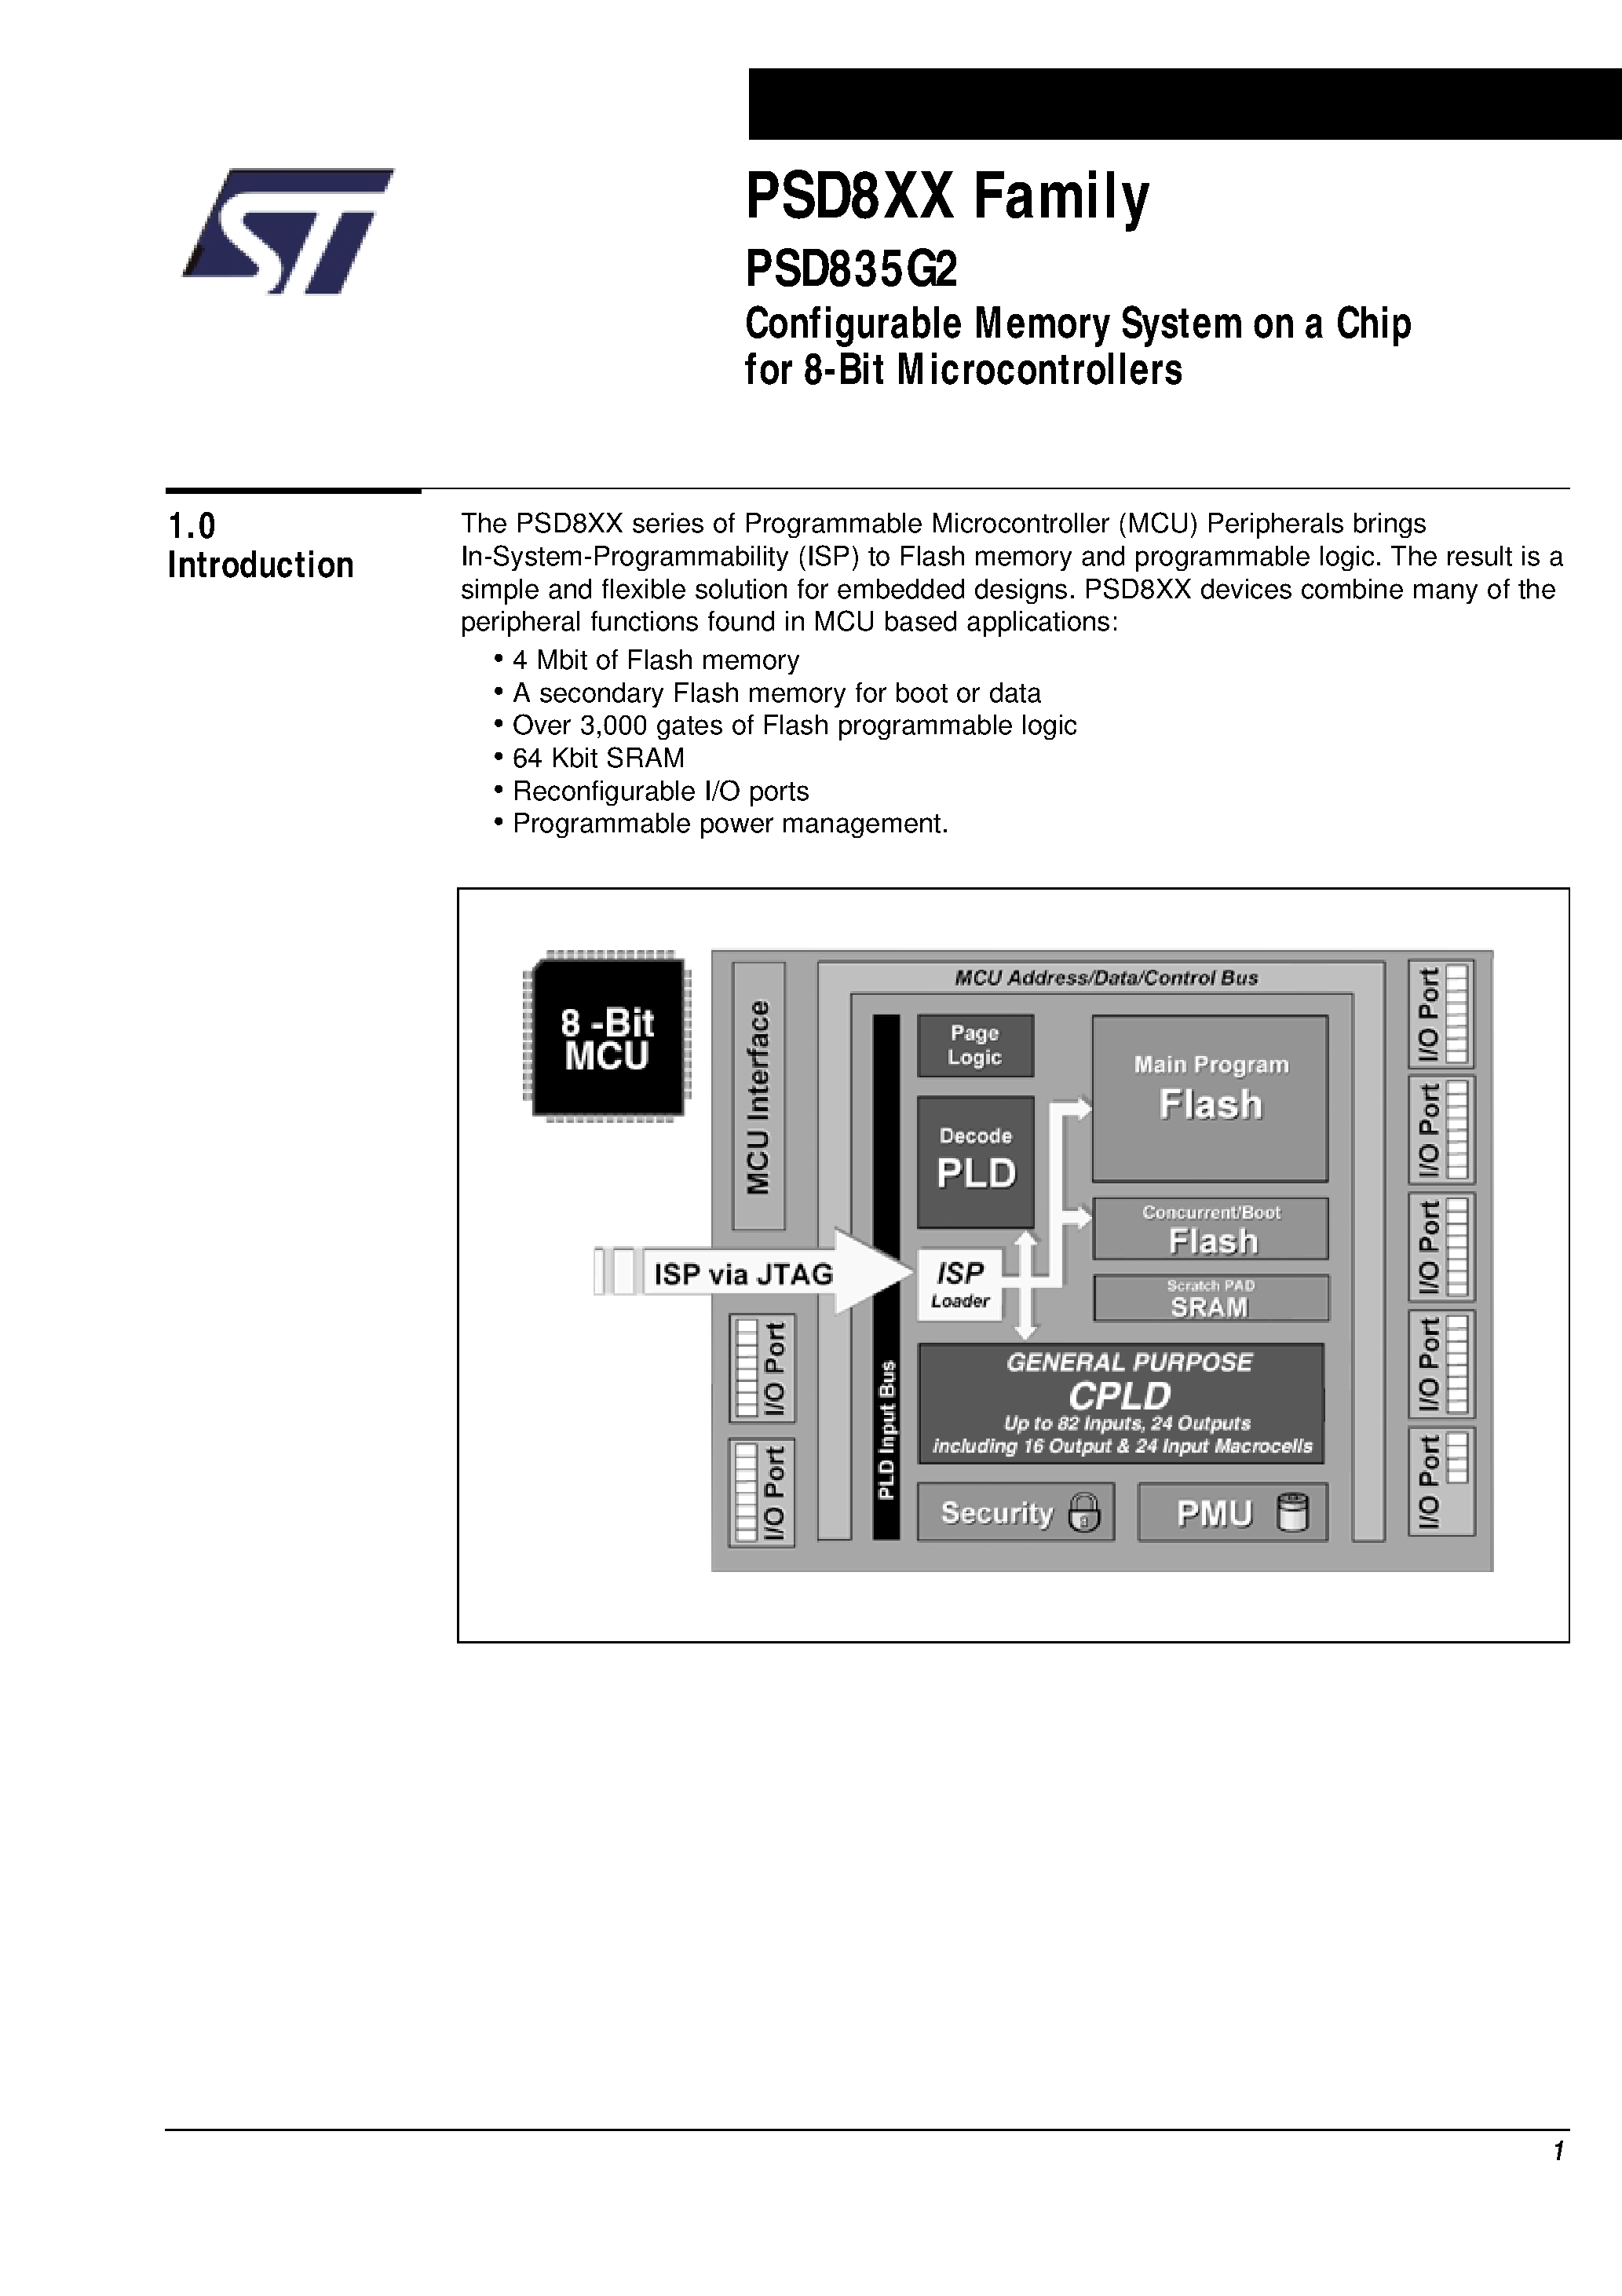 Datasheet PSD835F1V-A-20MI - Configurable Memory System on a Chip for 8-Bit Microcontrollers page 2